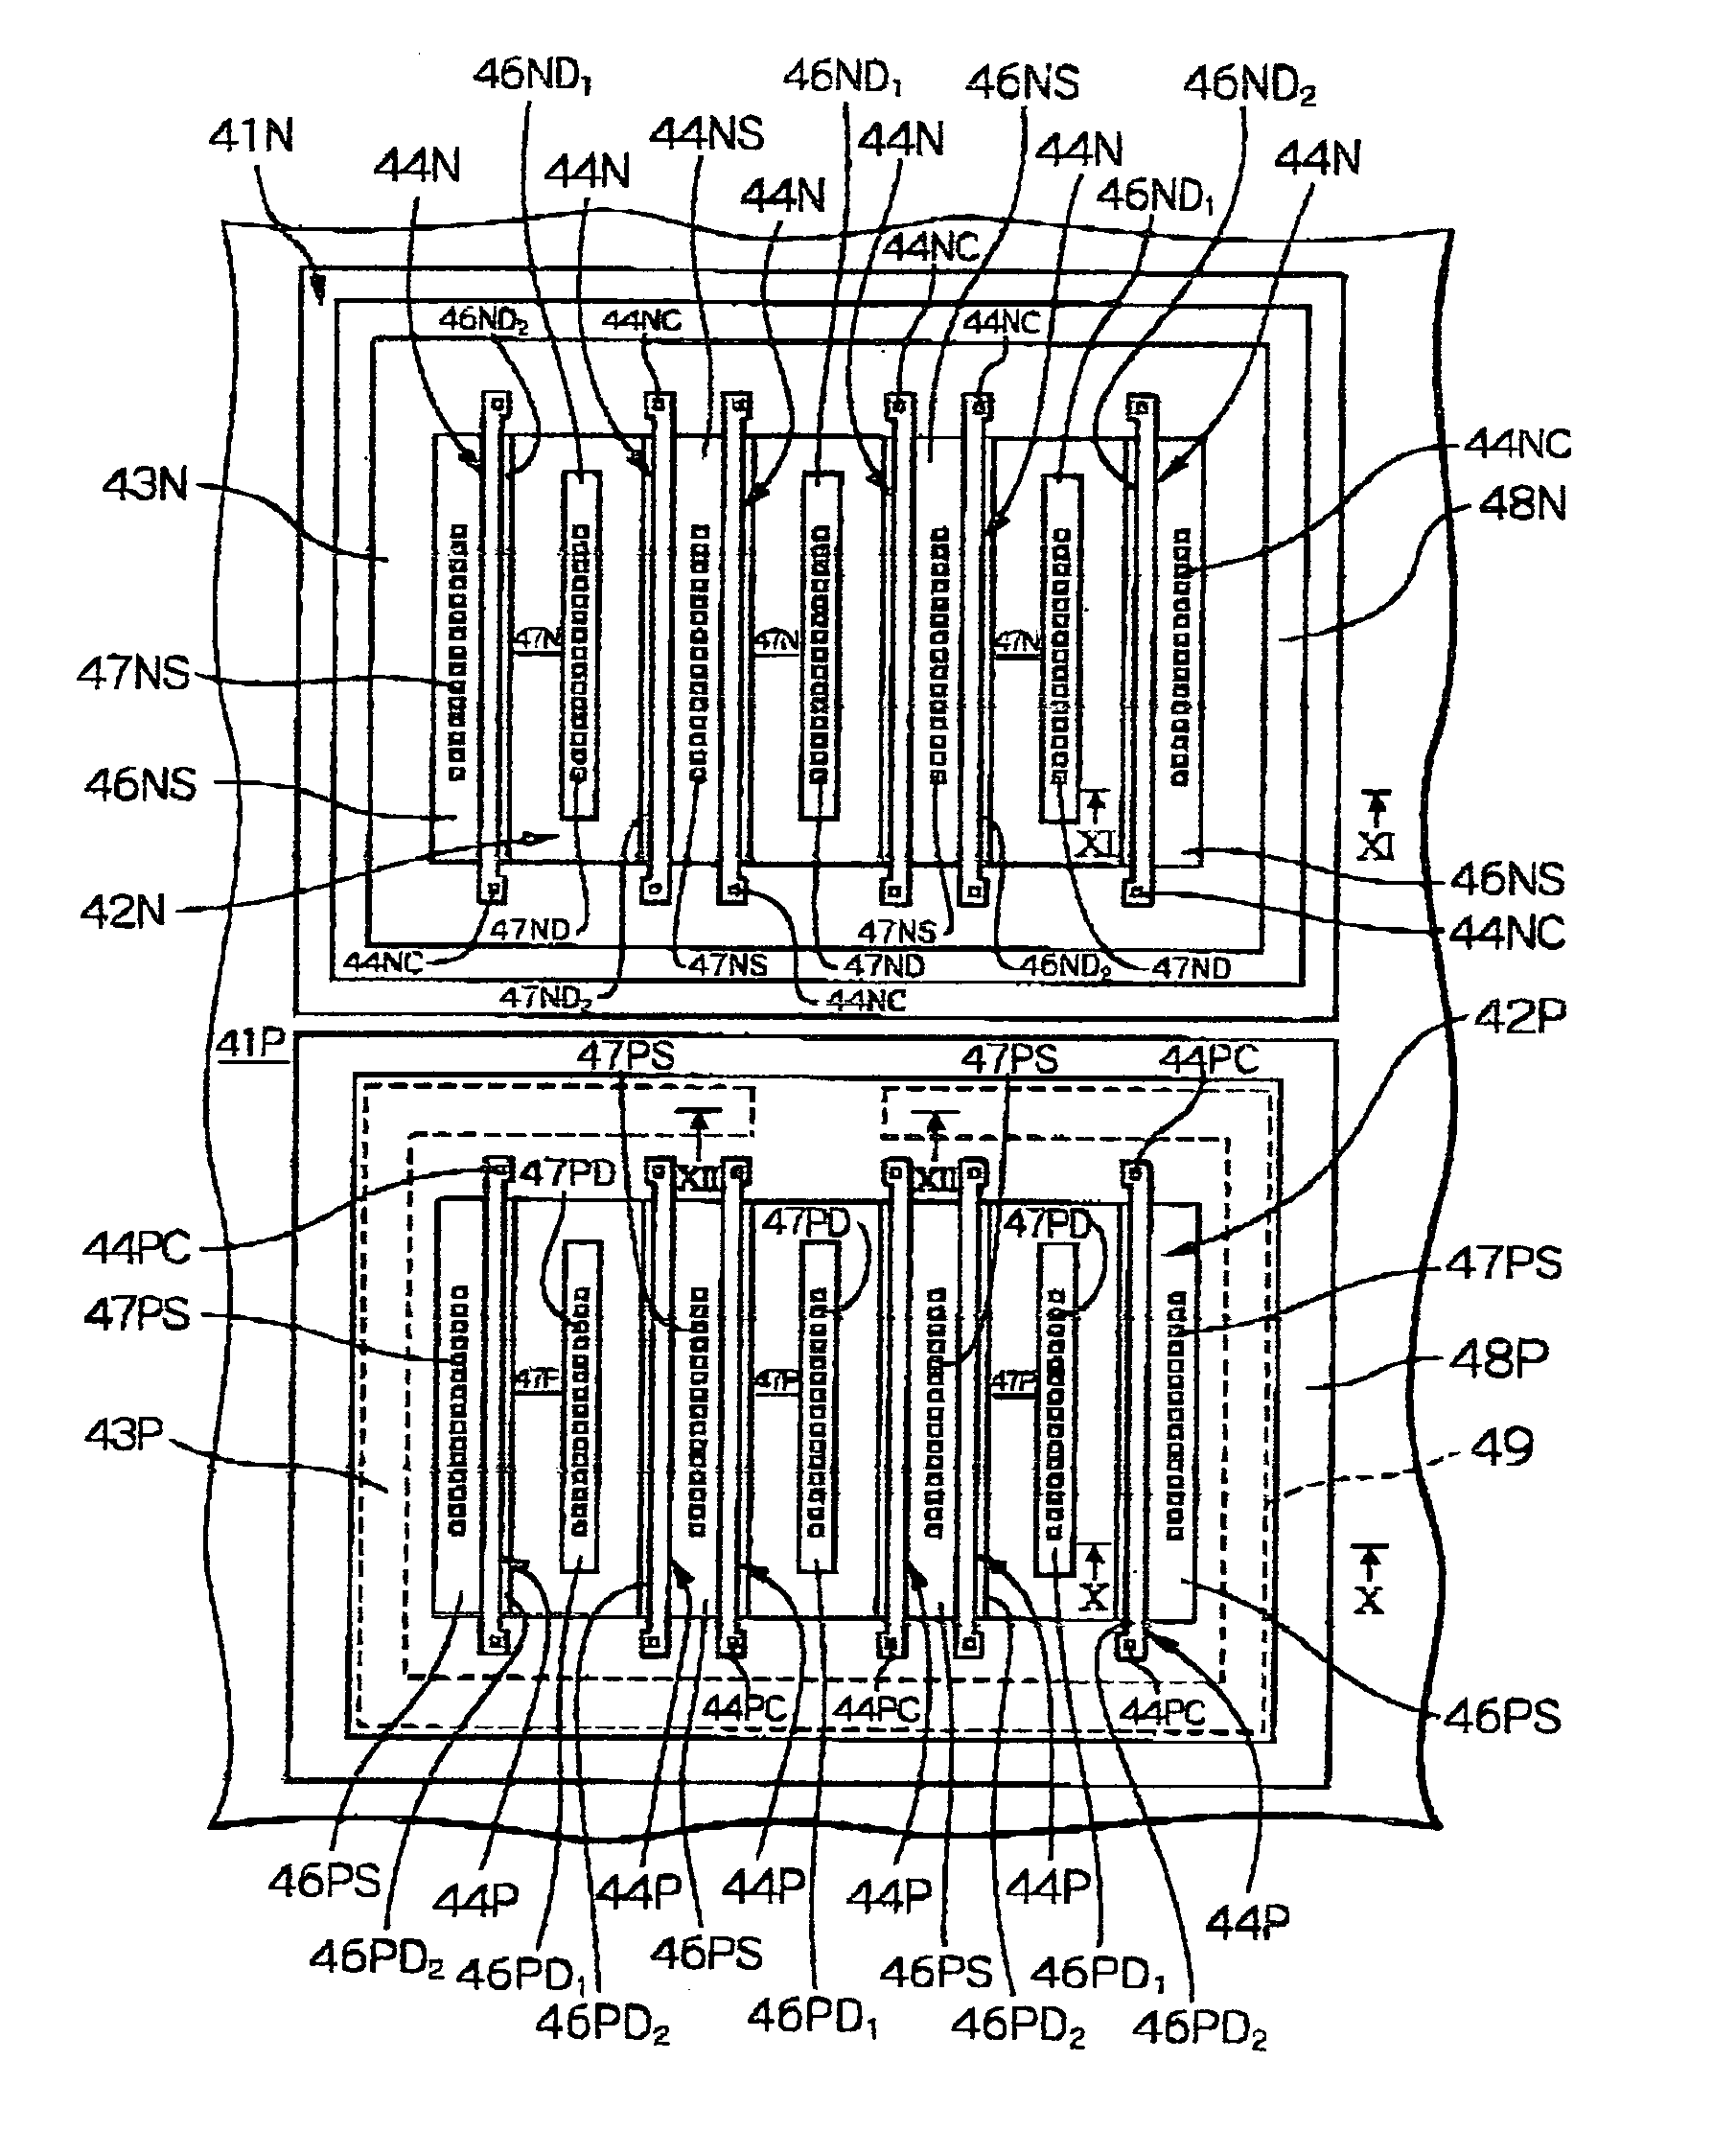 MOS type semiconductor device having electrostatic discharge protection arrangement